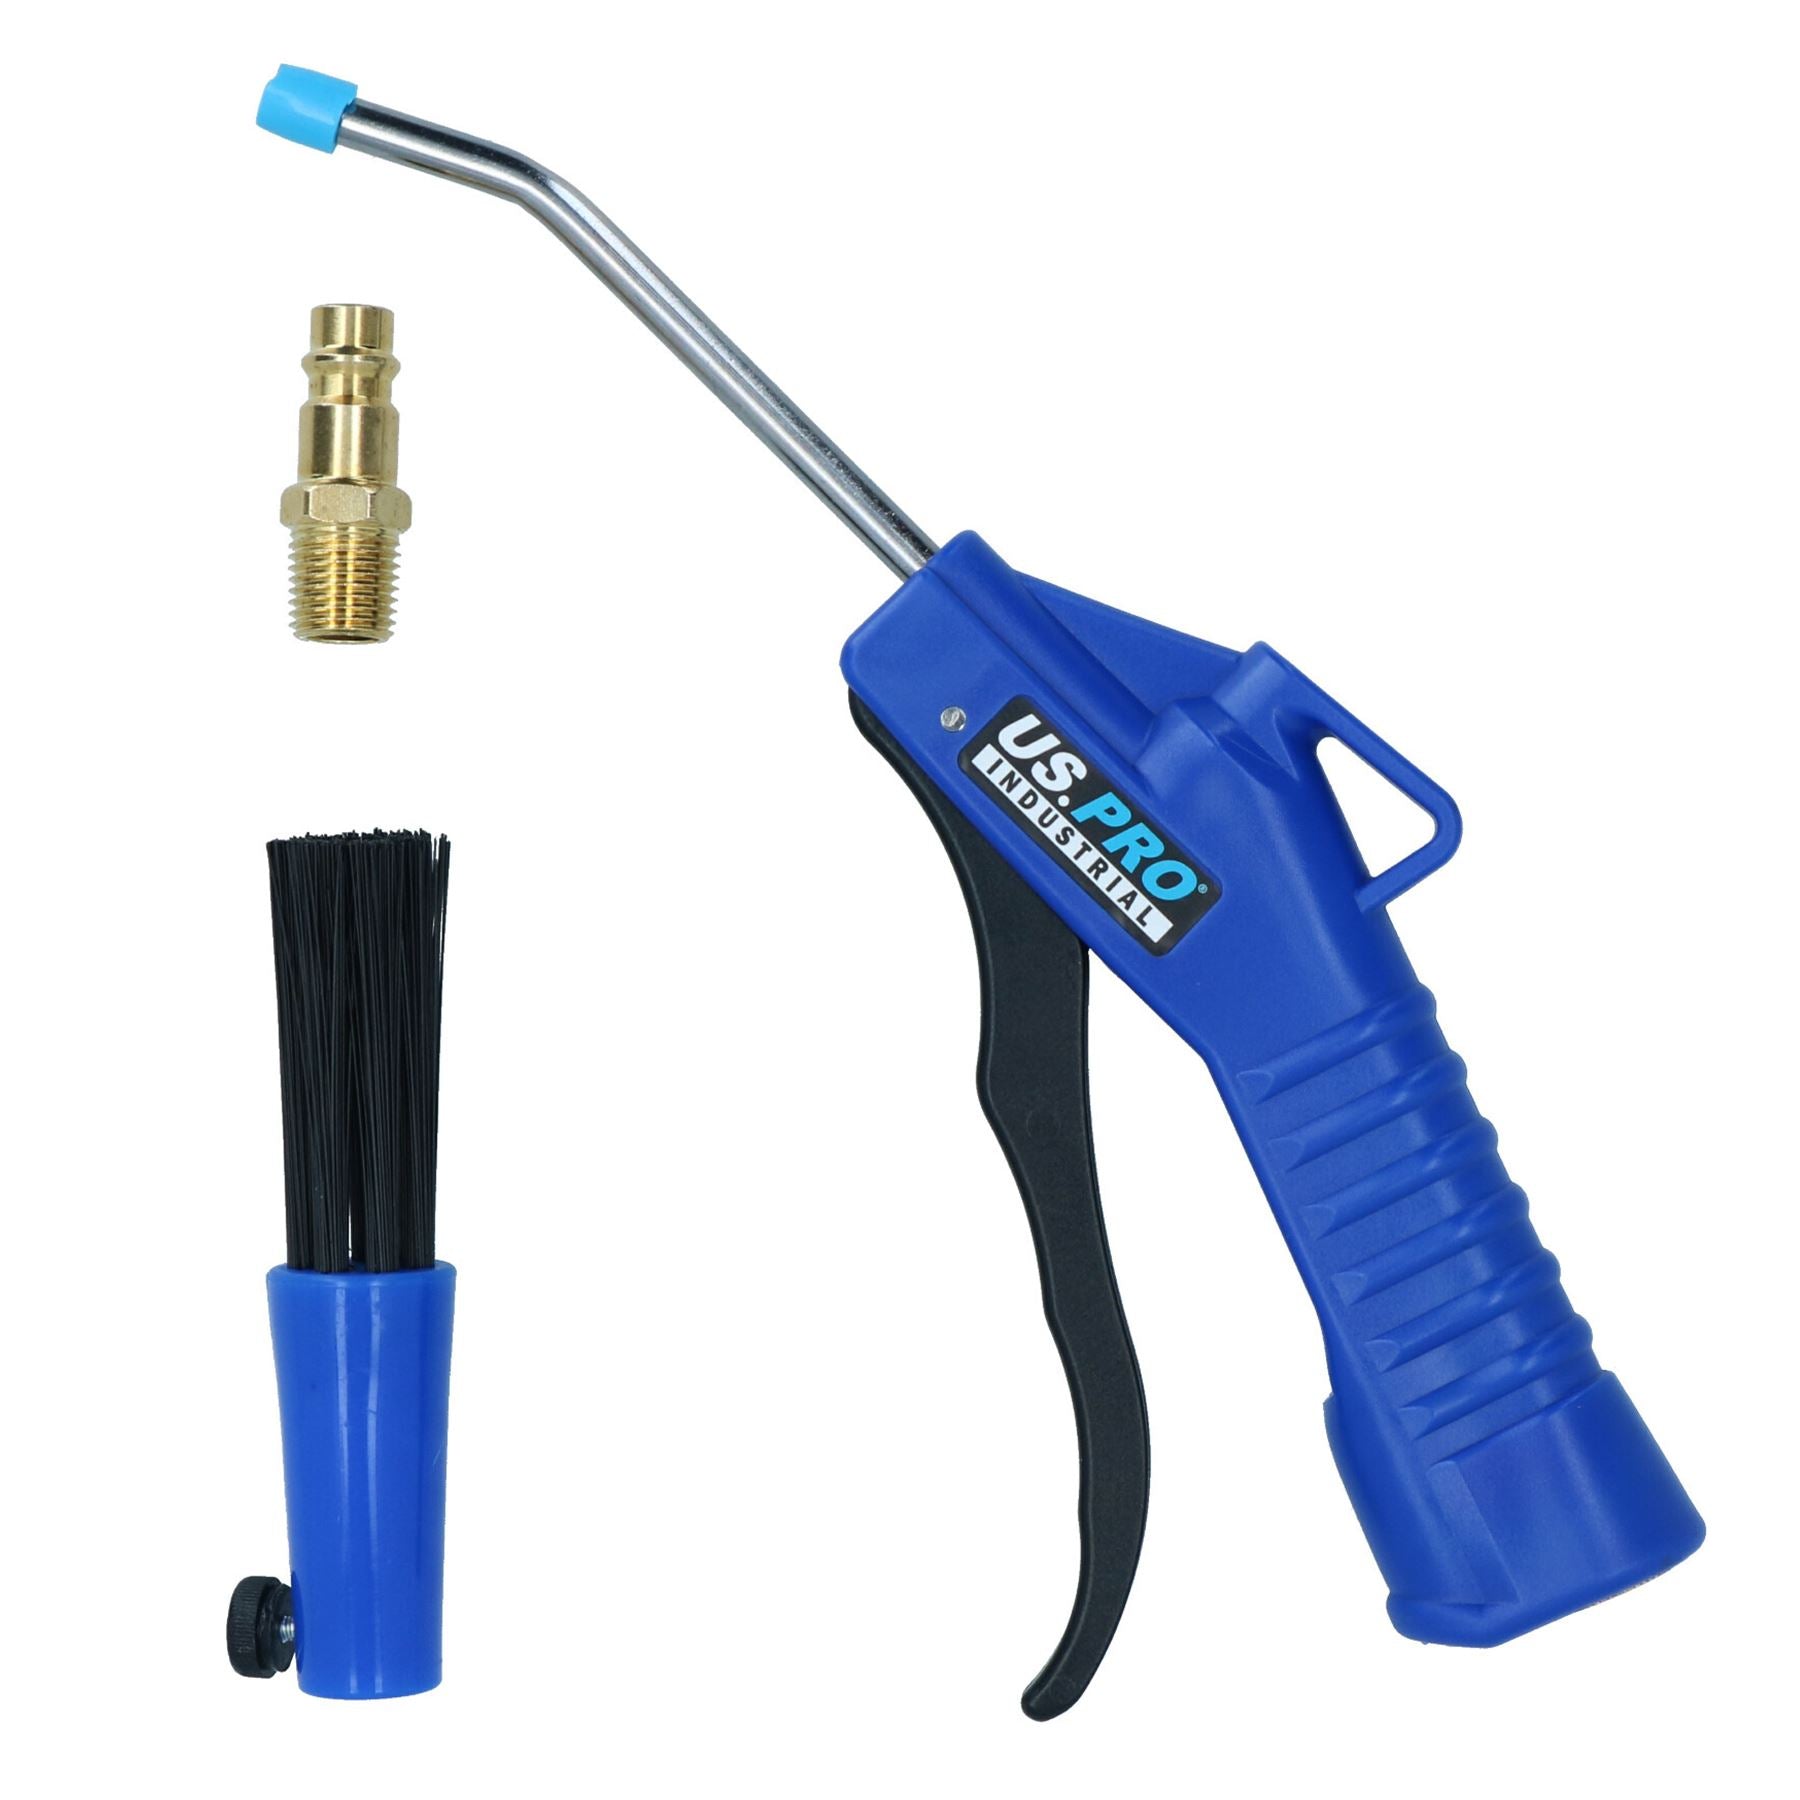 Air Blow Dust Blower Blowing + Brush Gun Remover Removal Duster Cleaner Set